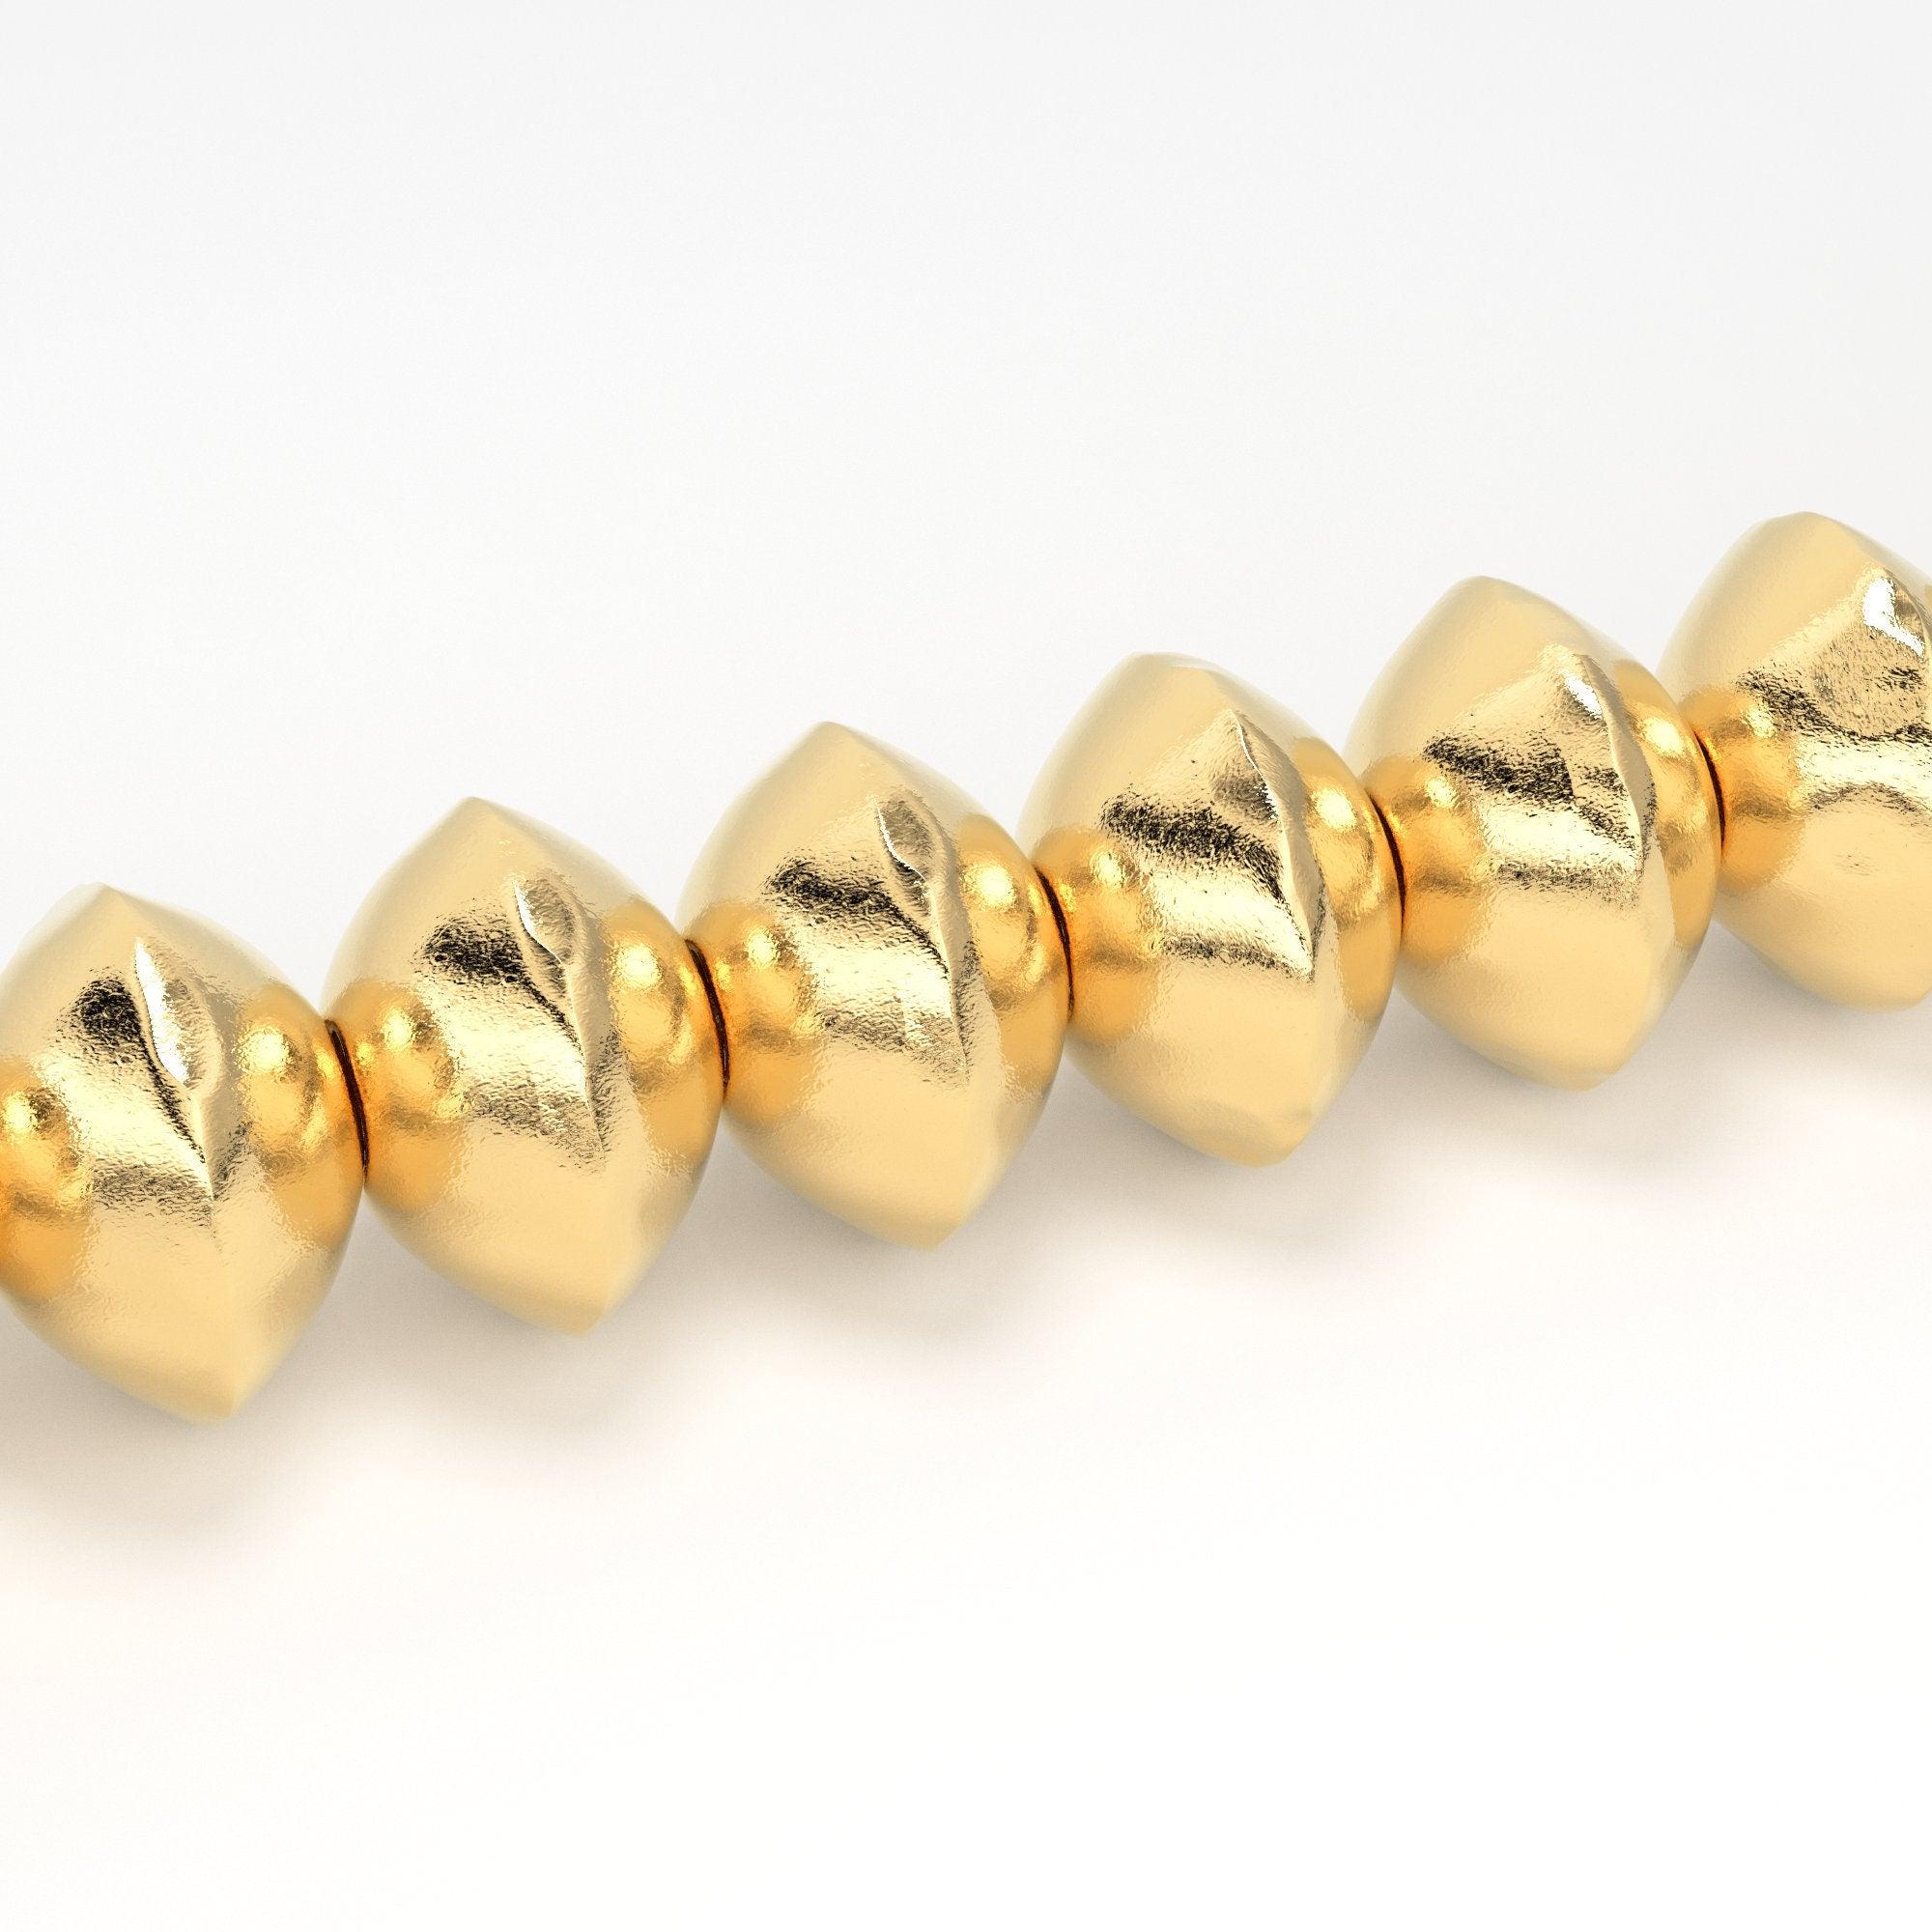 4mm 18k Solid Yellow Gold Fancy Textured Rondelle Spacer Beads (20 pieces)  2 inches long Strand